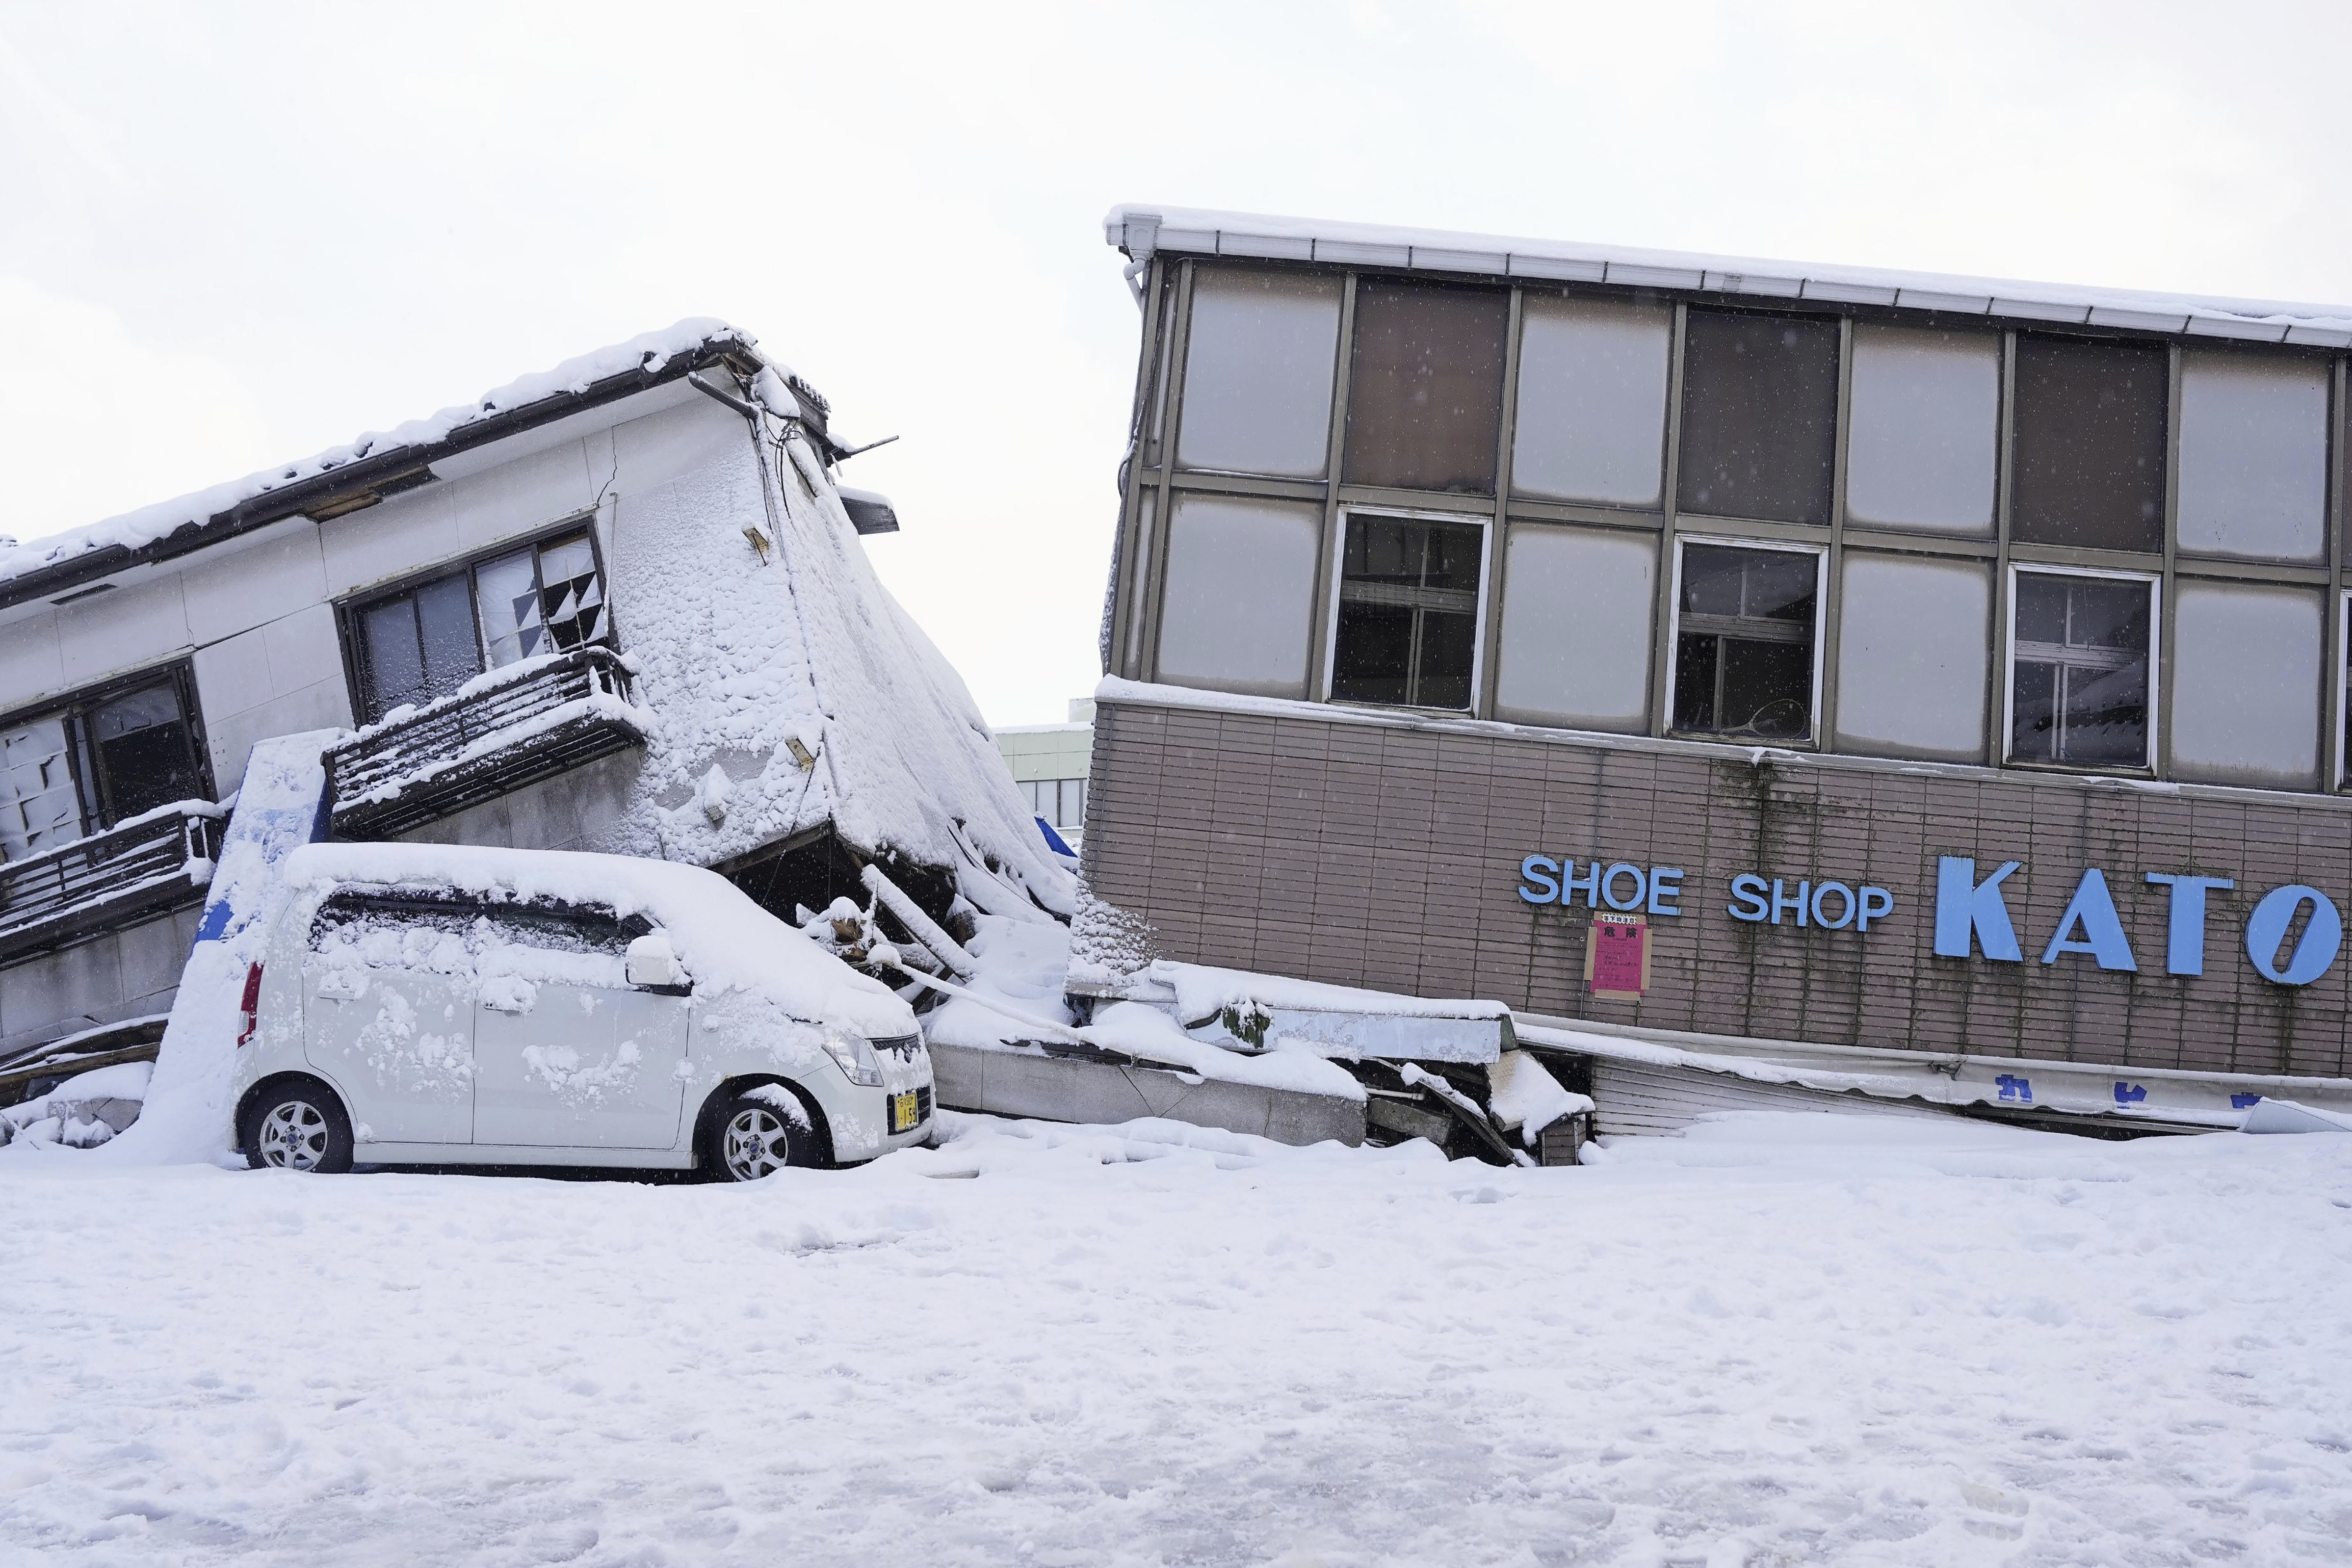 Fallen buildings are snow-covered in Anamizi, Ishikawa prefecture, Monday, Jan. 8, 2024. Rescue teams worked through snow to deliver supplies to isolated hamlets Monday, a week after a powerful earthquake hit western Japan. (Kyodo News via AP)